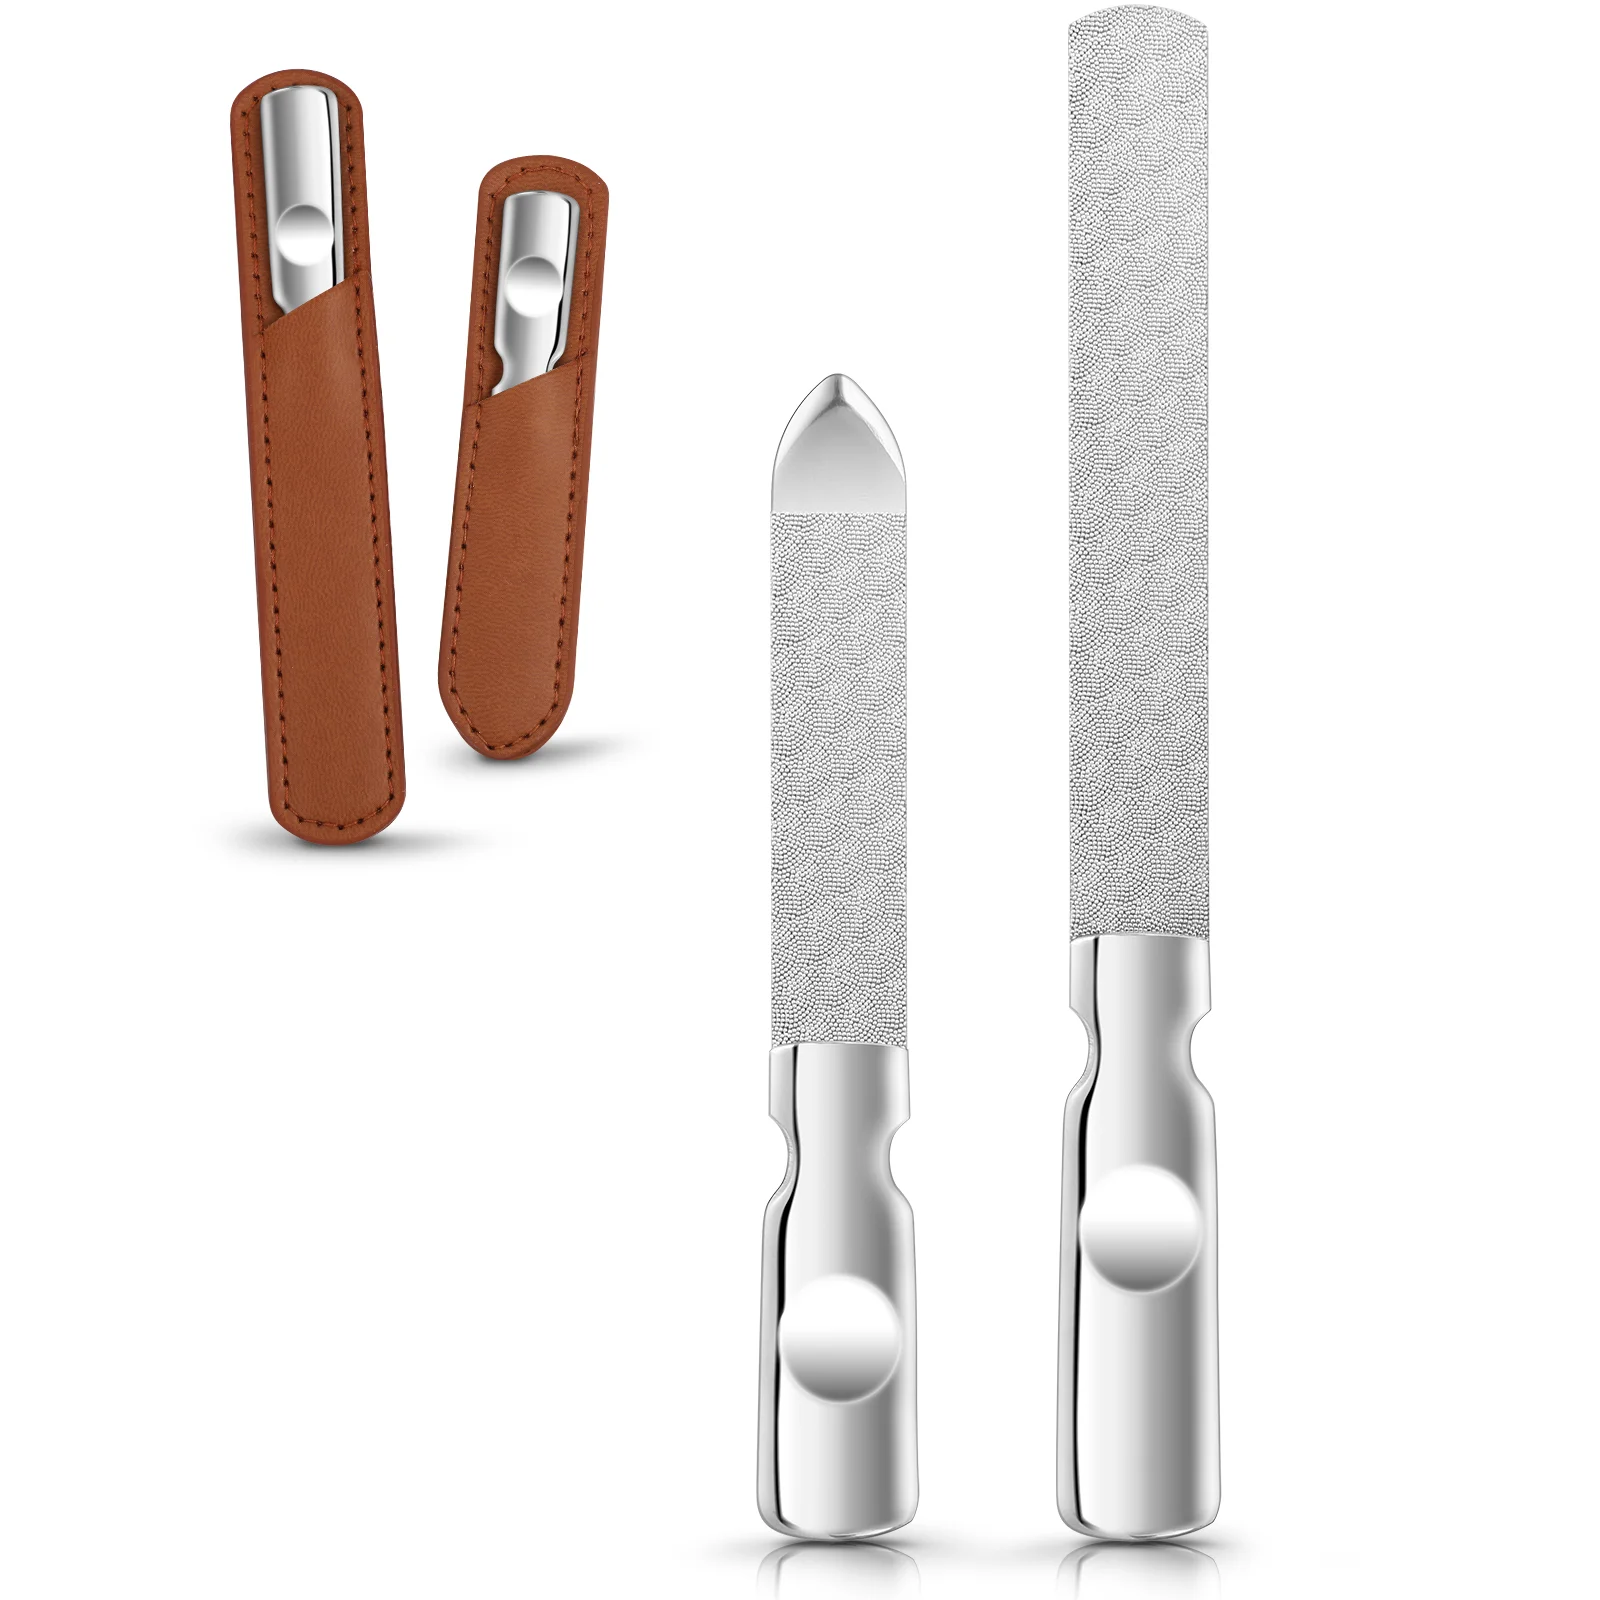 

2Pcs Stainless Steel Metal Nail Files Double Sided Manicure Files with Soft Cover for Fingernail Toenail